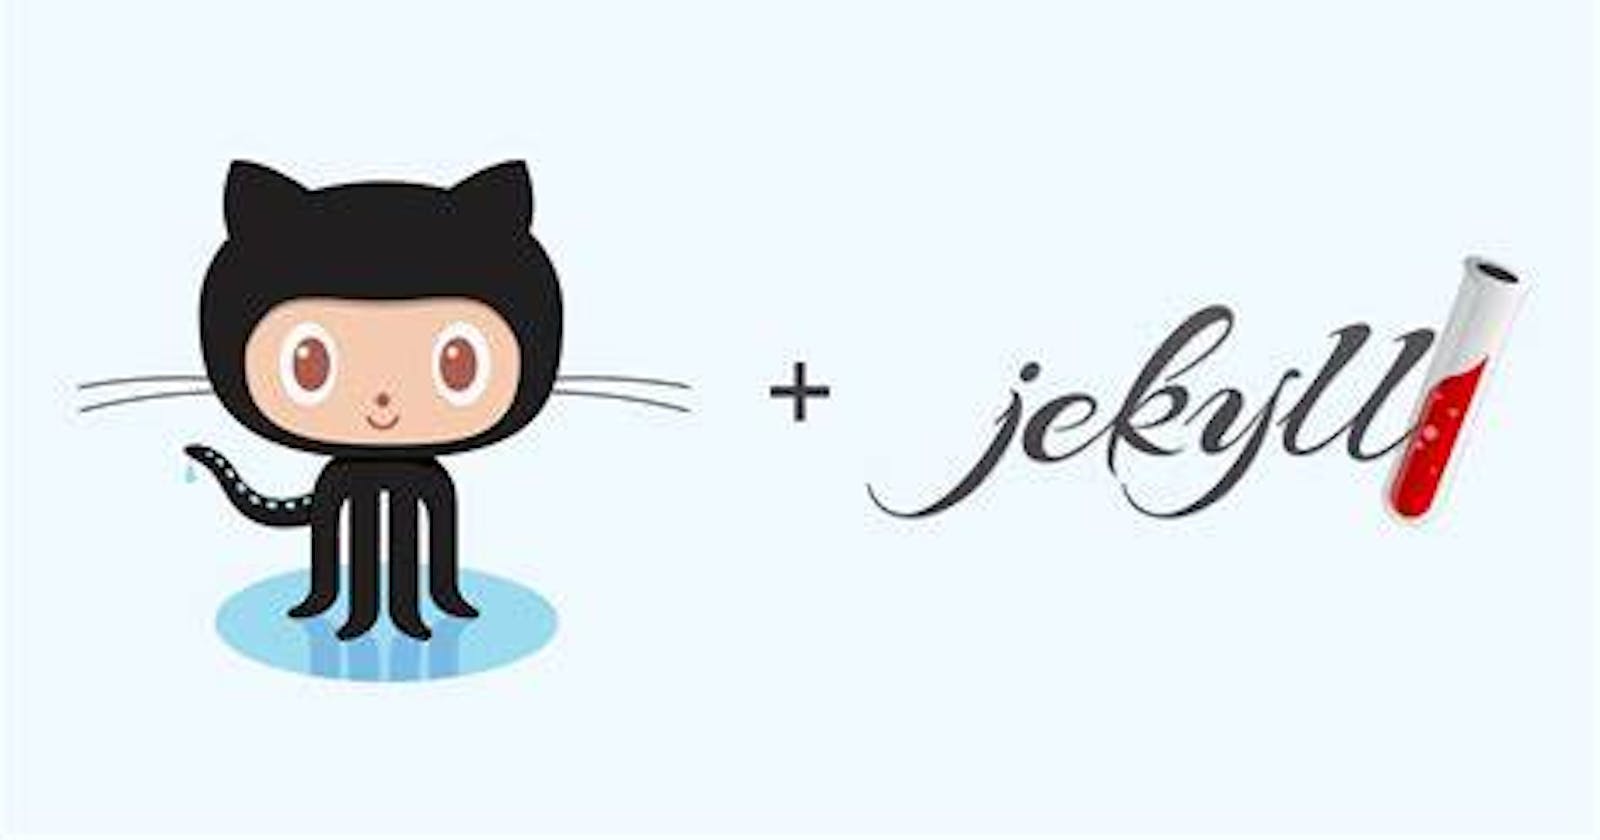 How am I blogging using Jekyll and GitHub pages from my Android phone